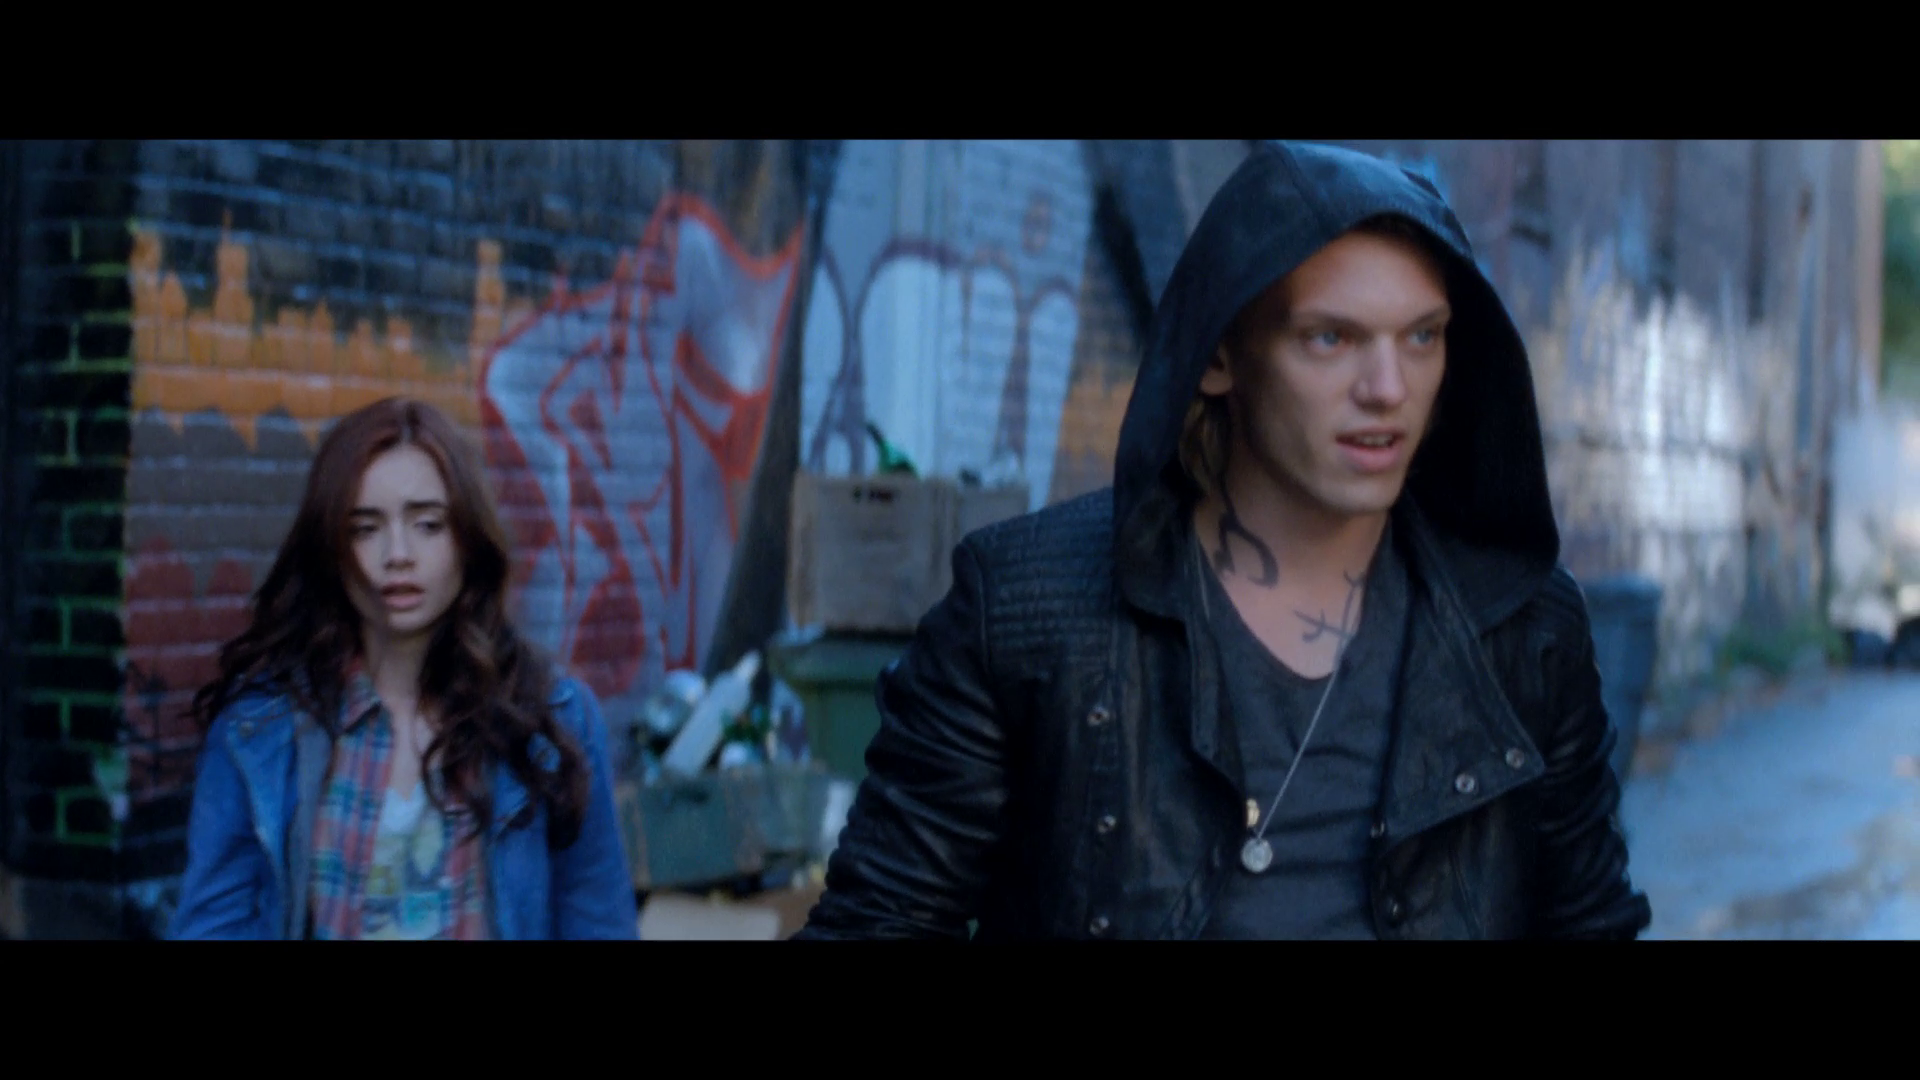 city of bones book review new york times